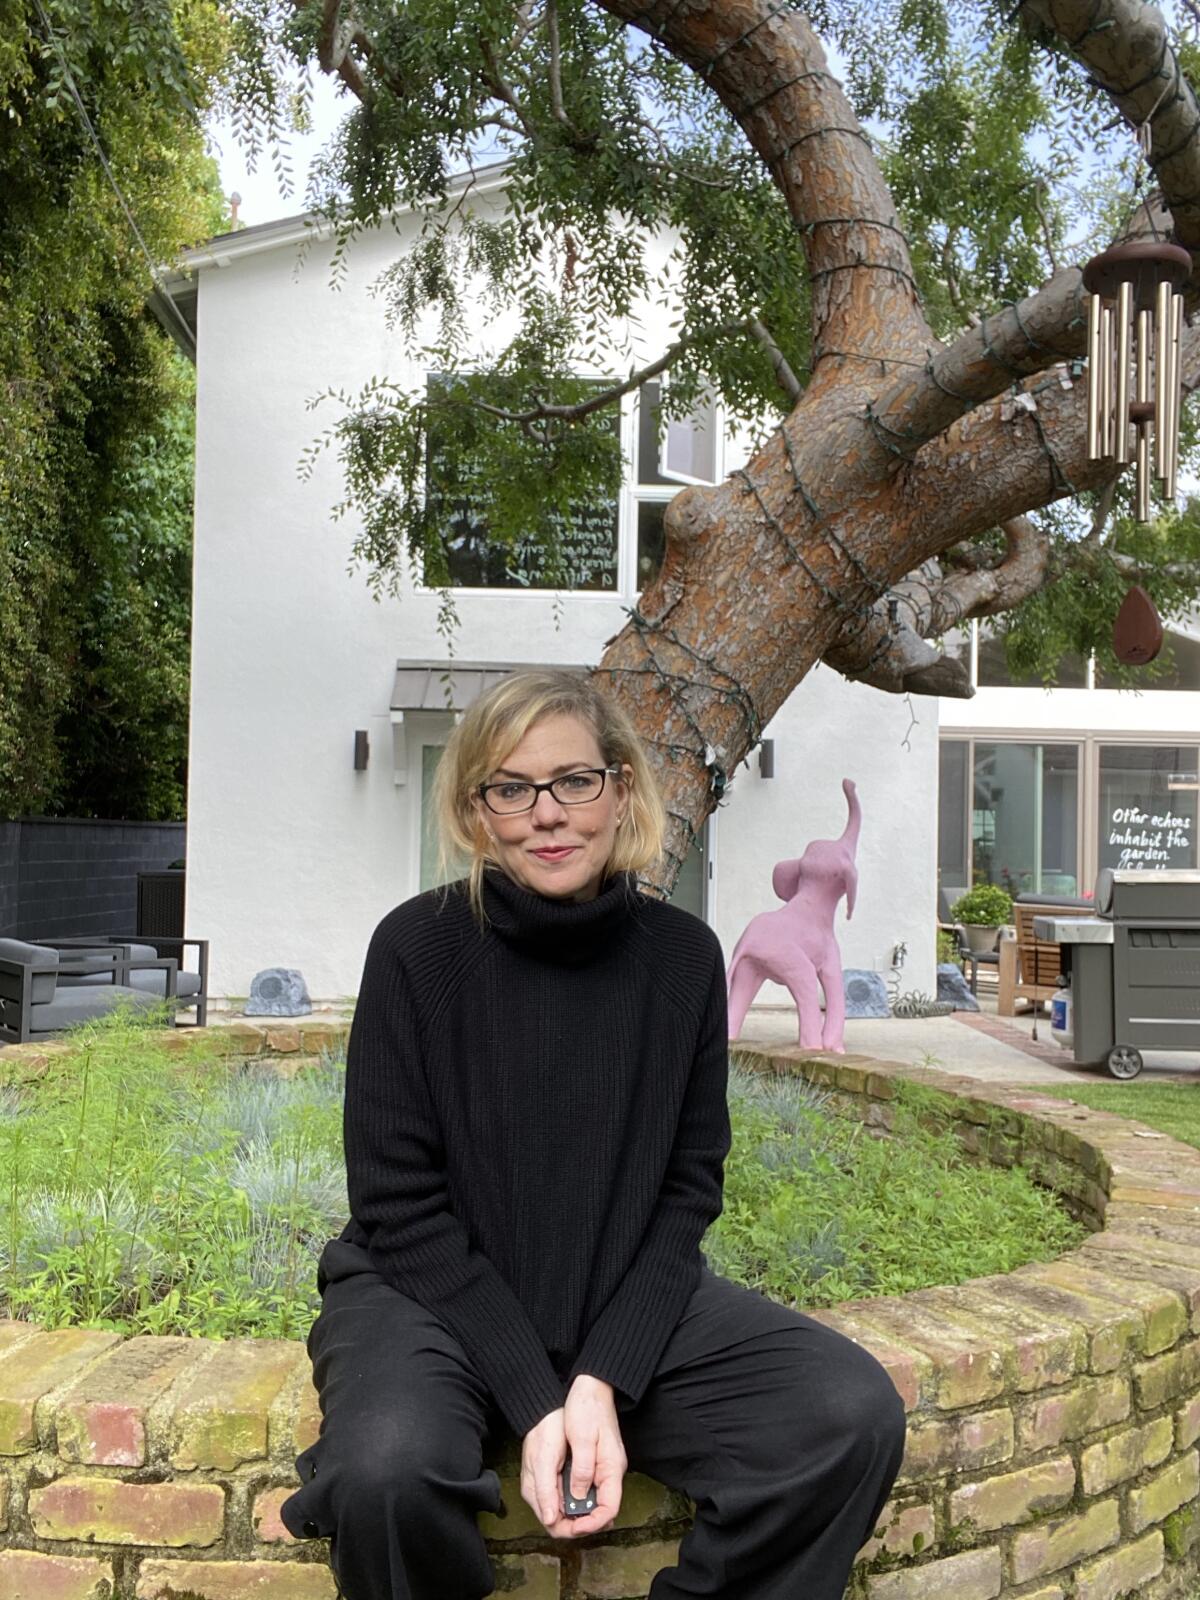 A woman in a black turtleneck sits on a raised brick garden bed 